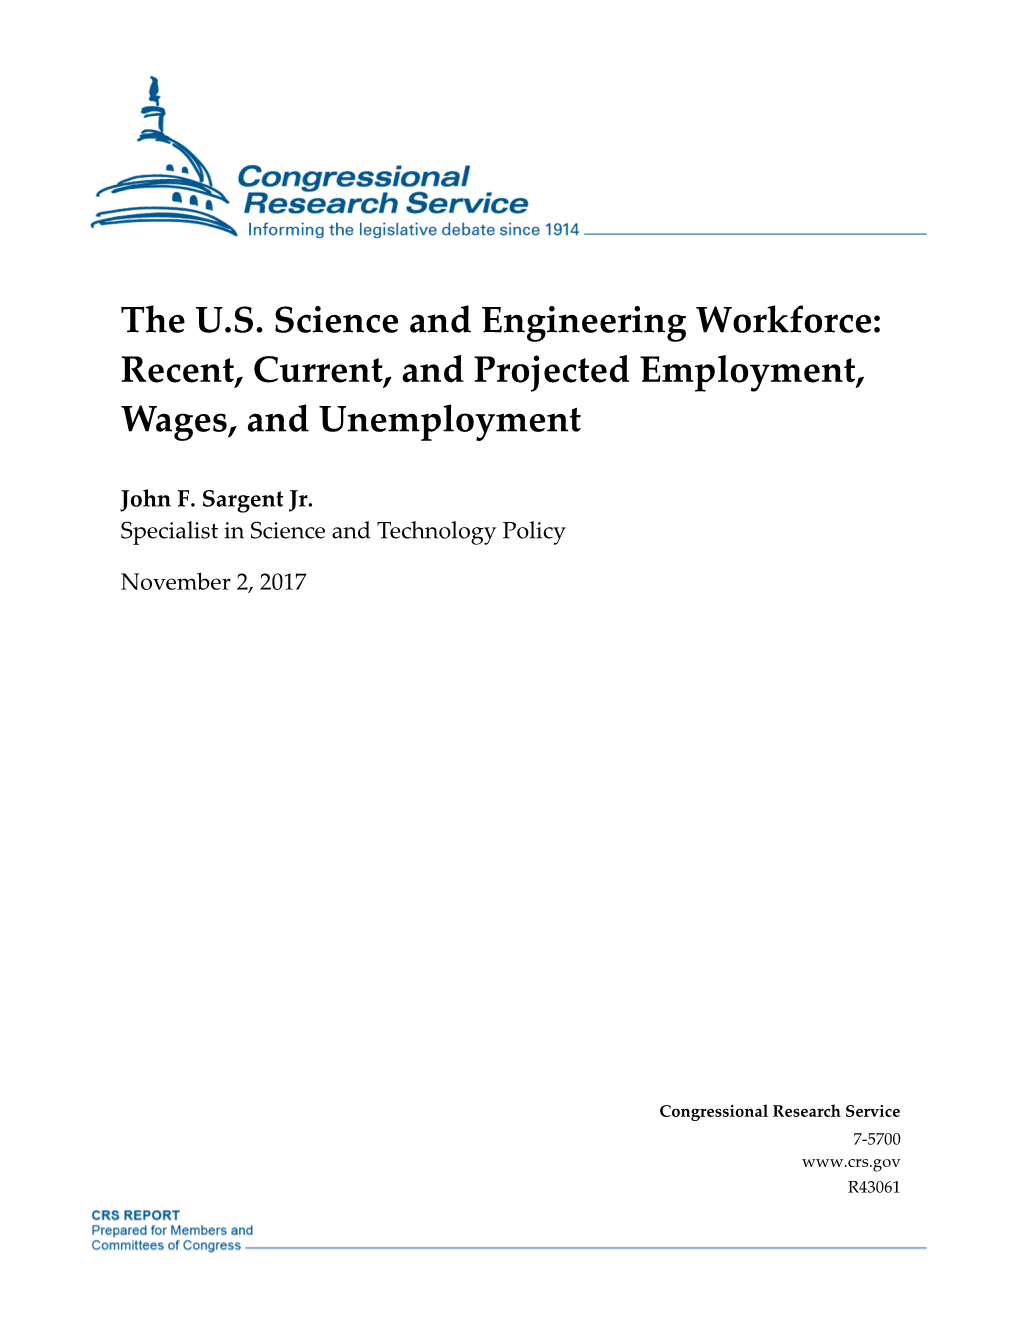 The US Science and Engineering Workforce: Recent, Current